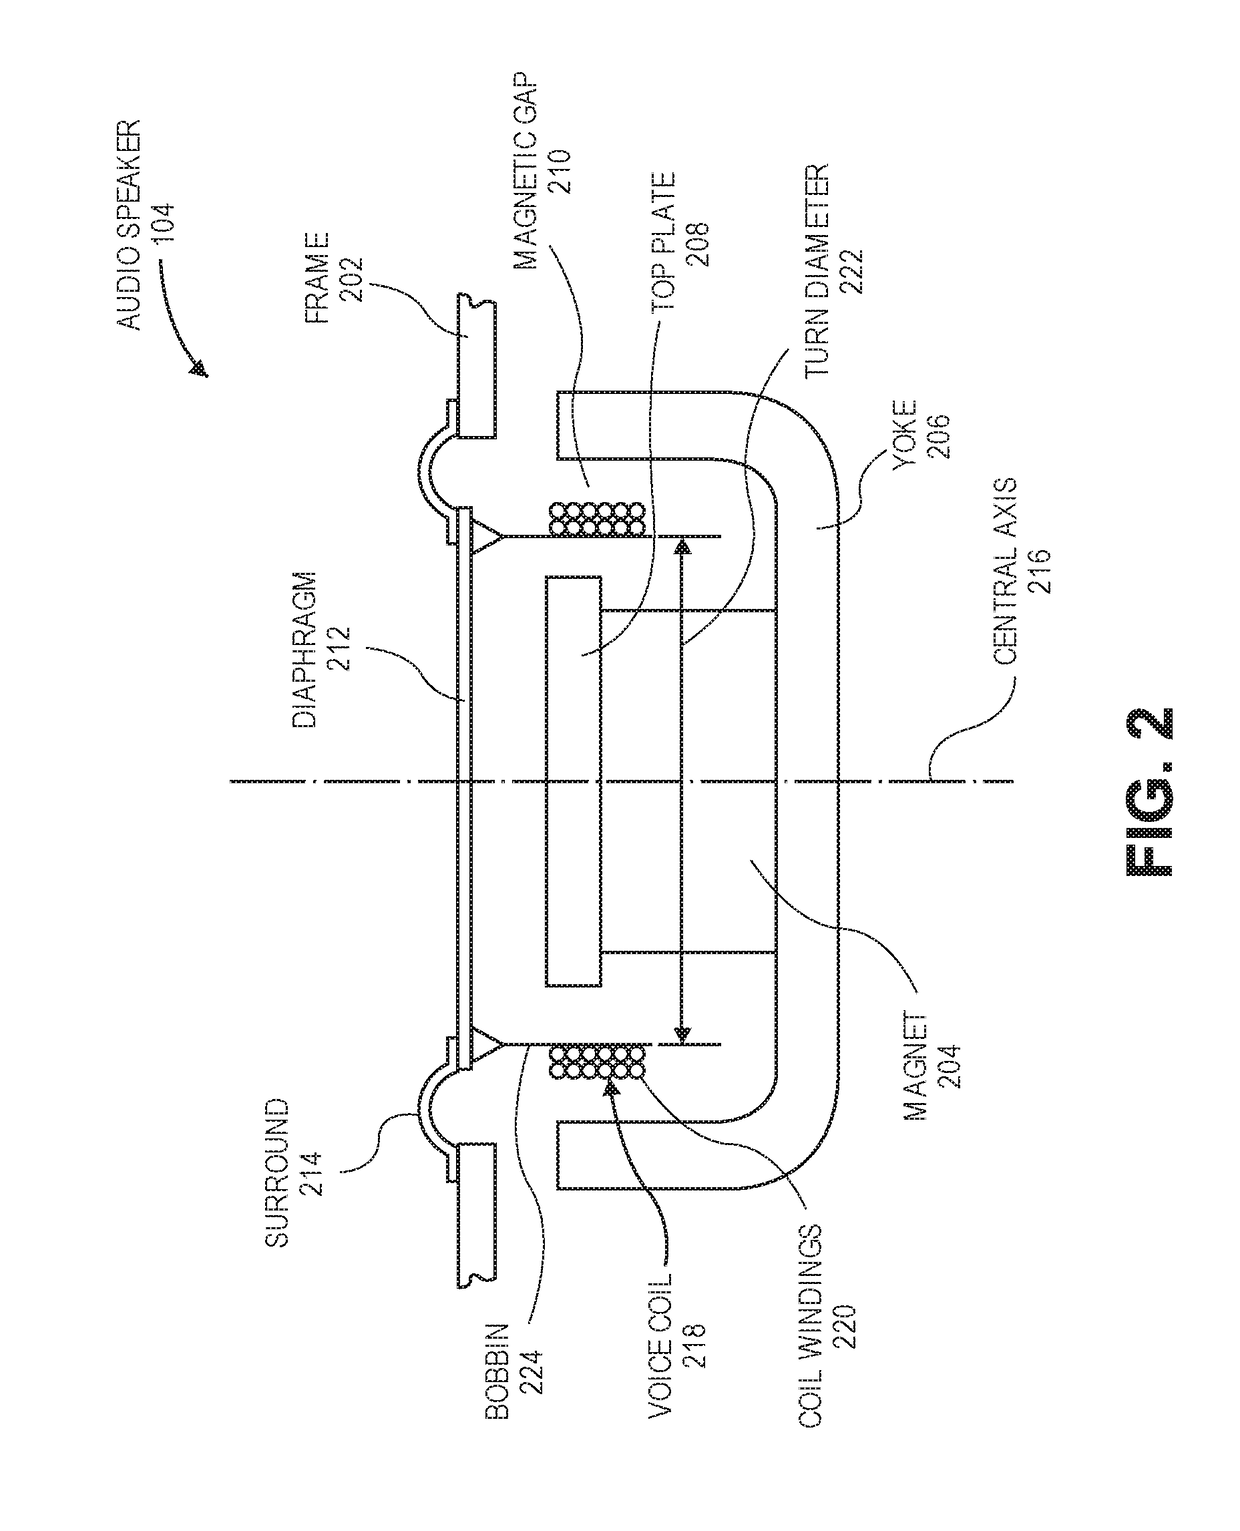 Voice coil having epoxy-bound winding layers